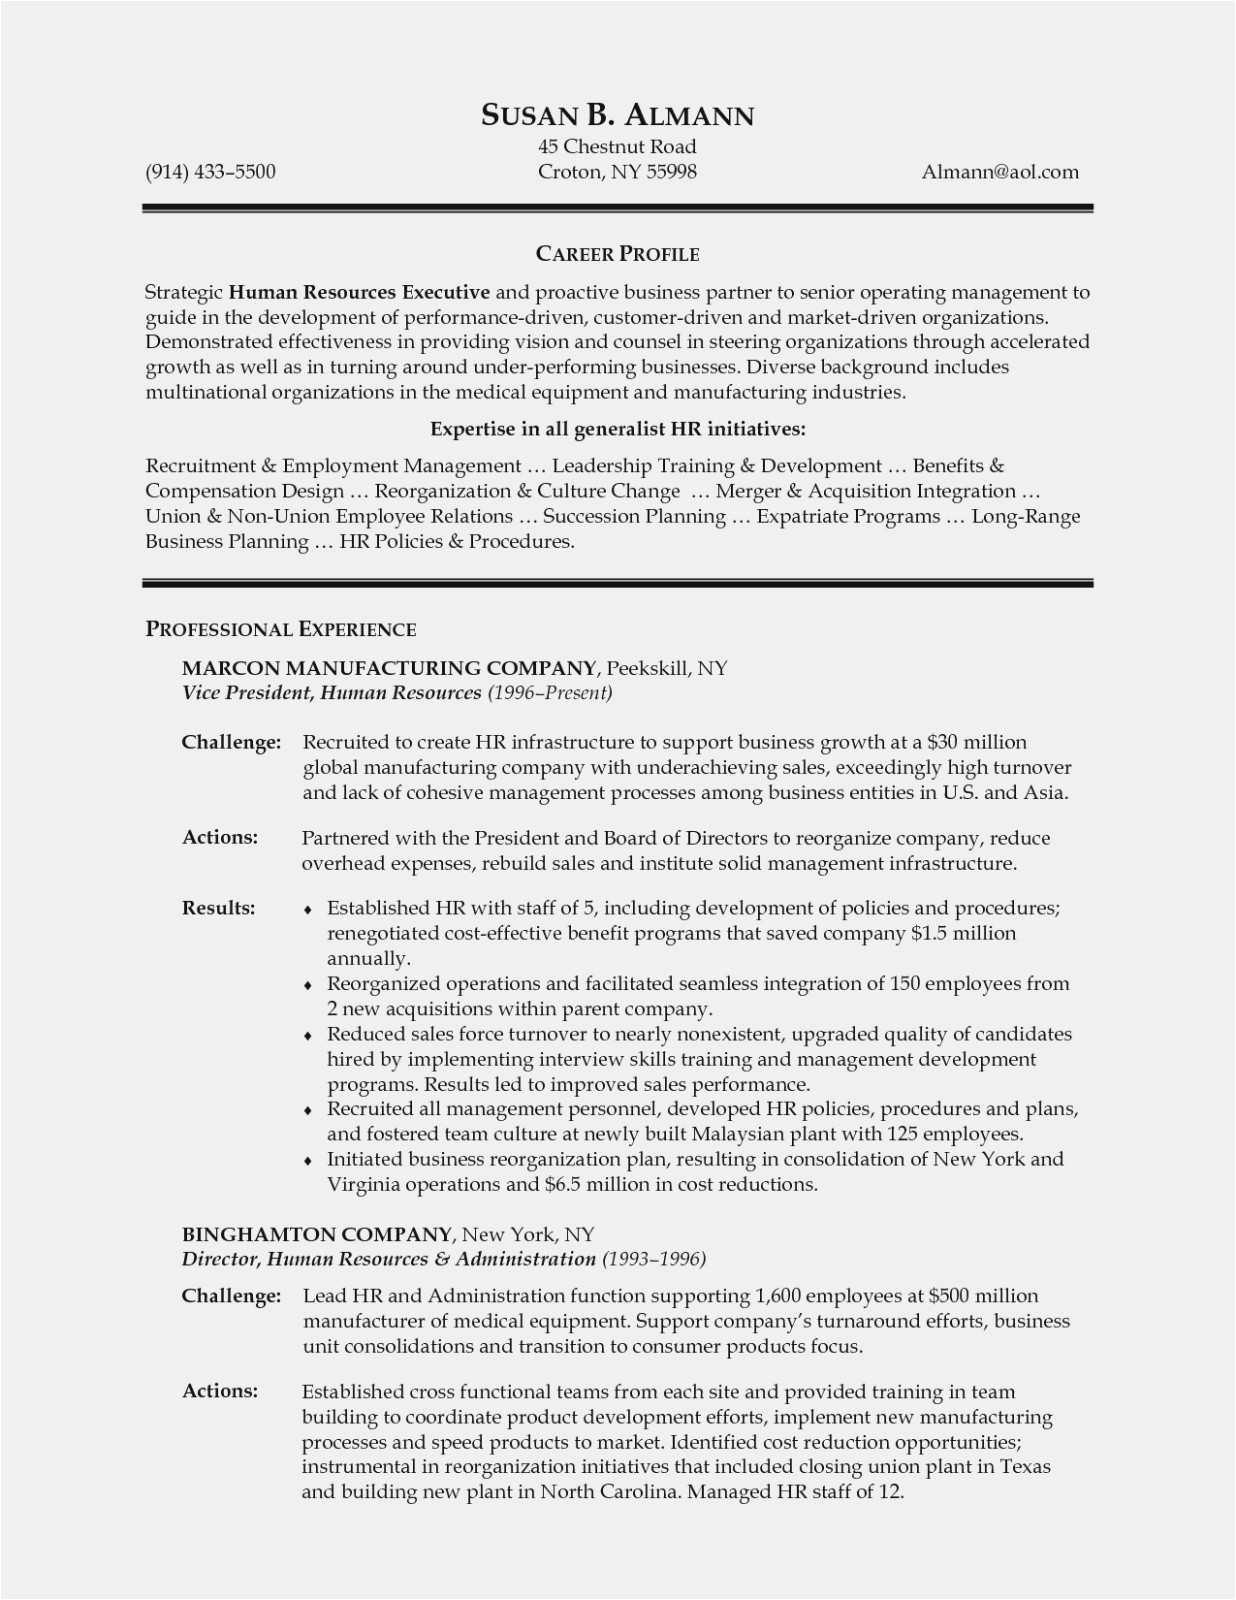 Vp Of Human Resources Resume Sample 11 Various Ways to Do Vice President Human Resources